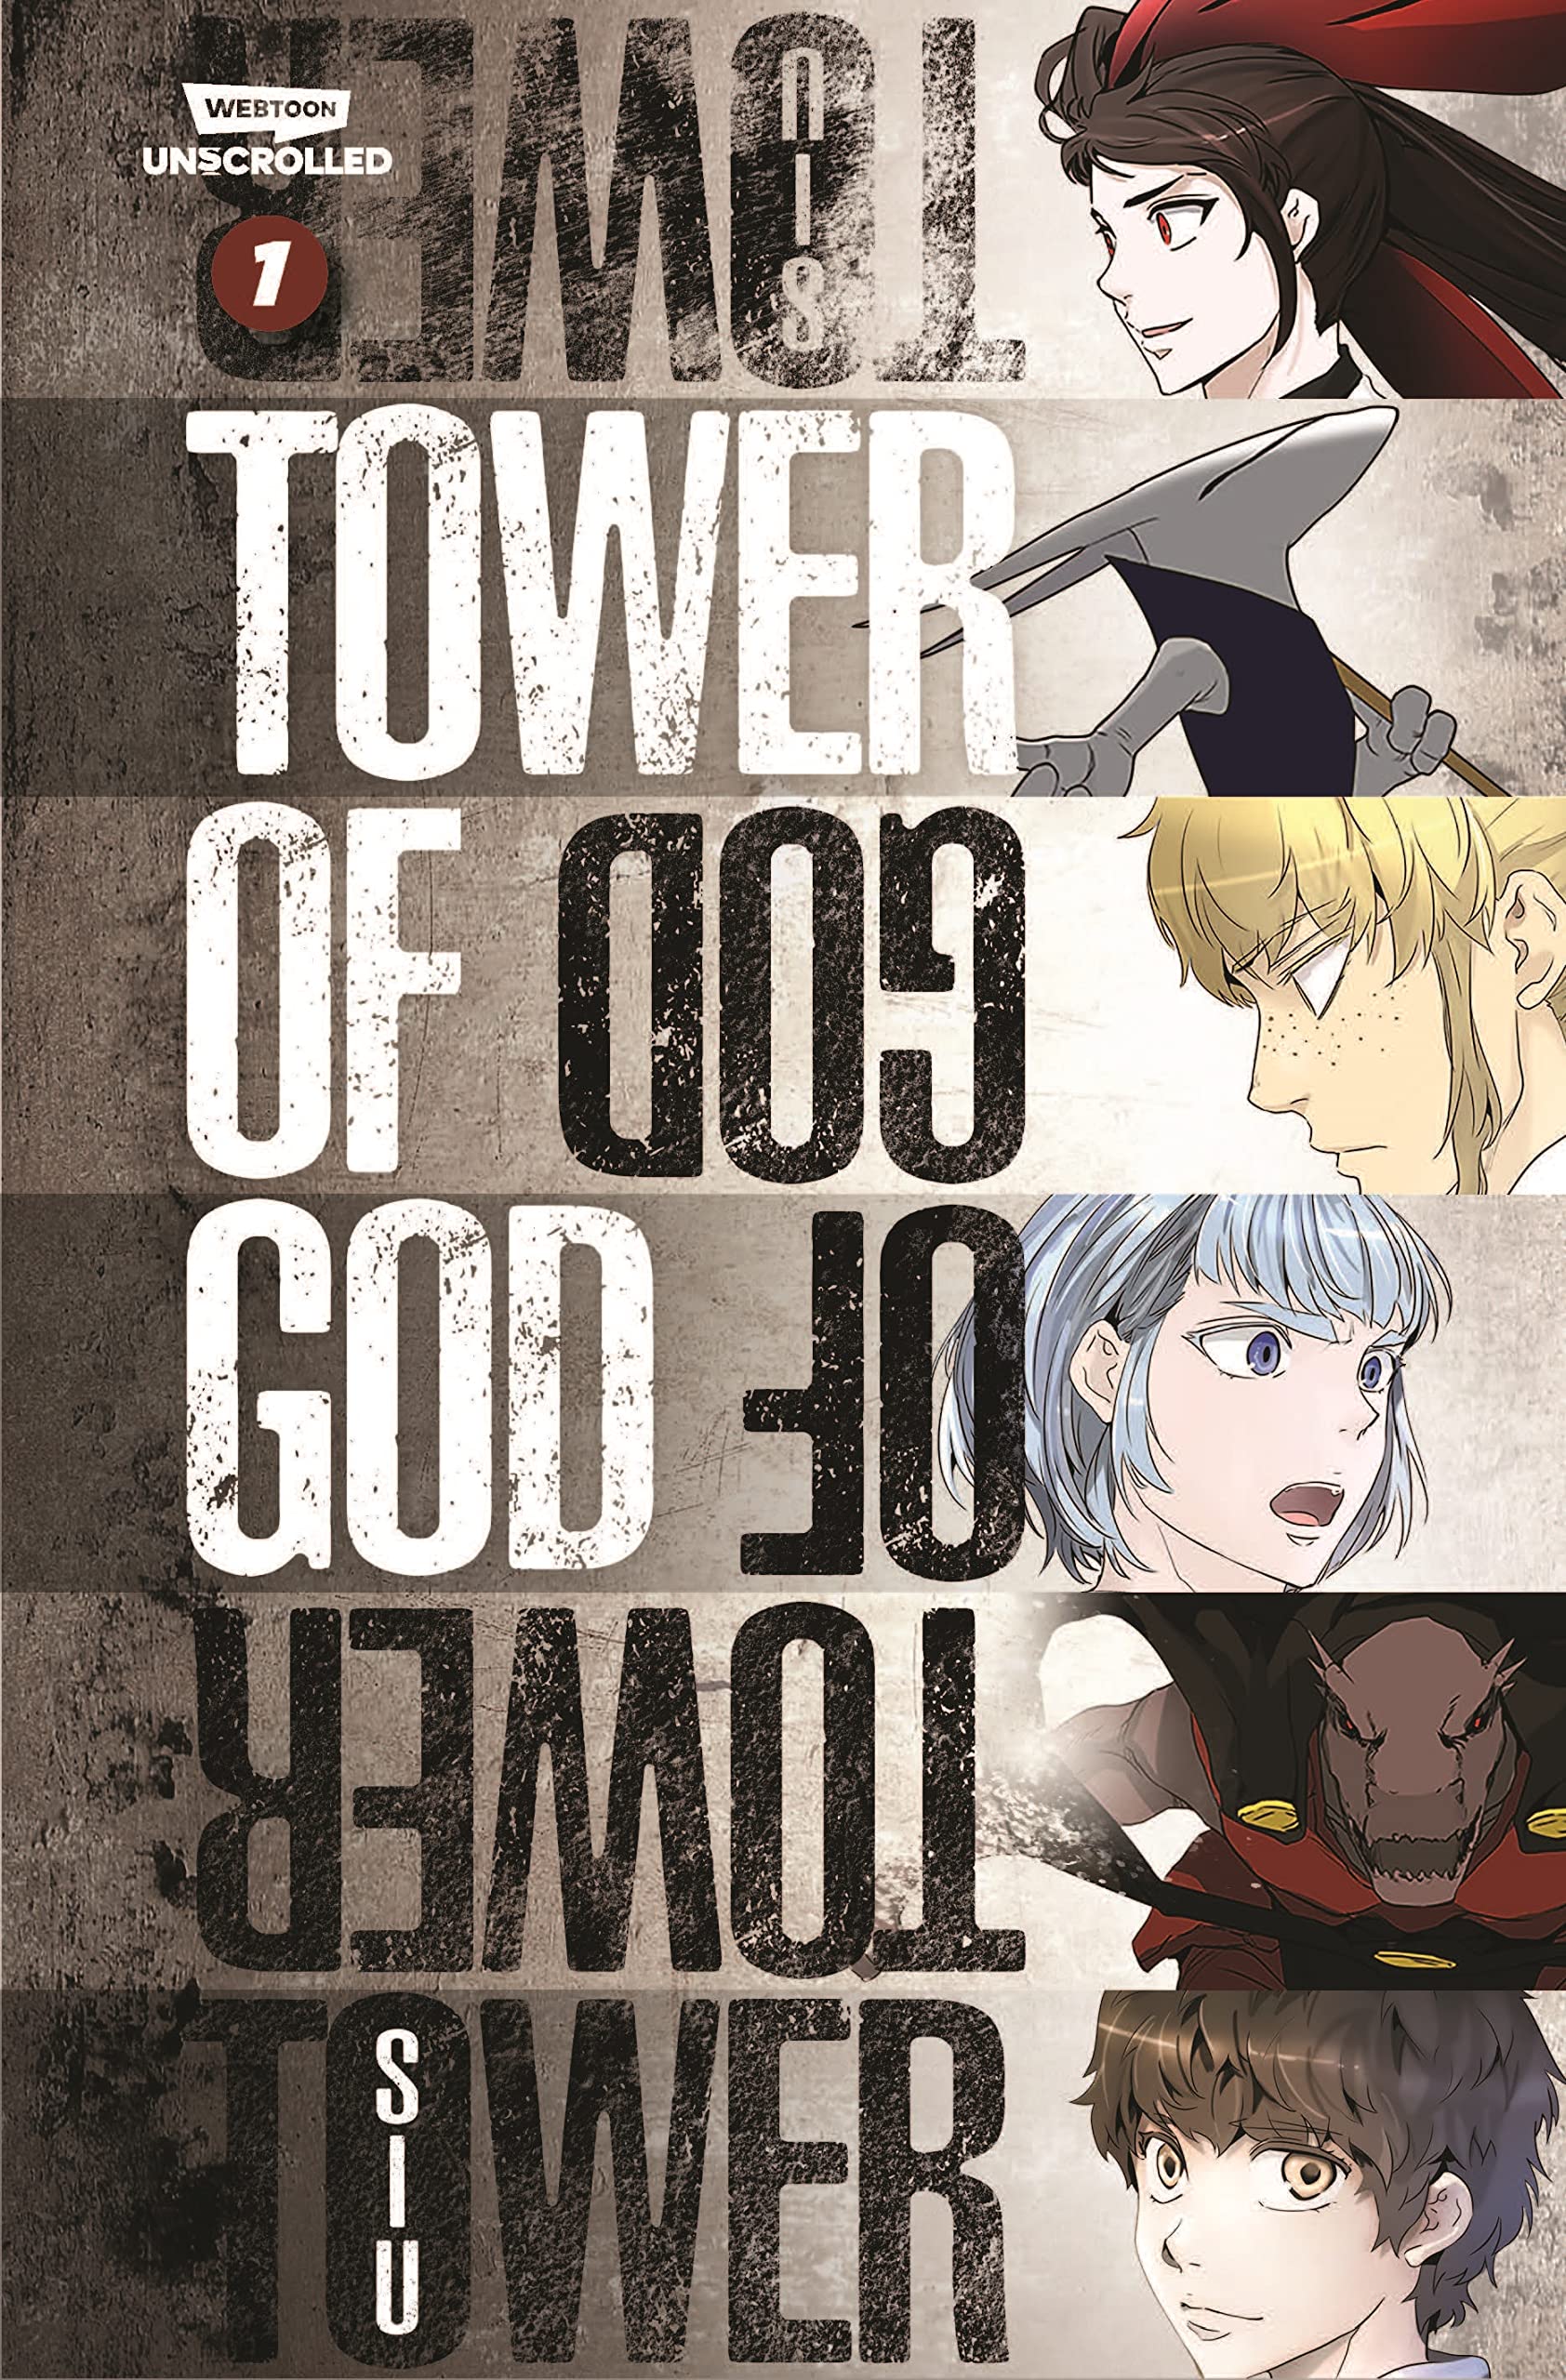 Read Tower of God Manga English [New Chapters] Online Free